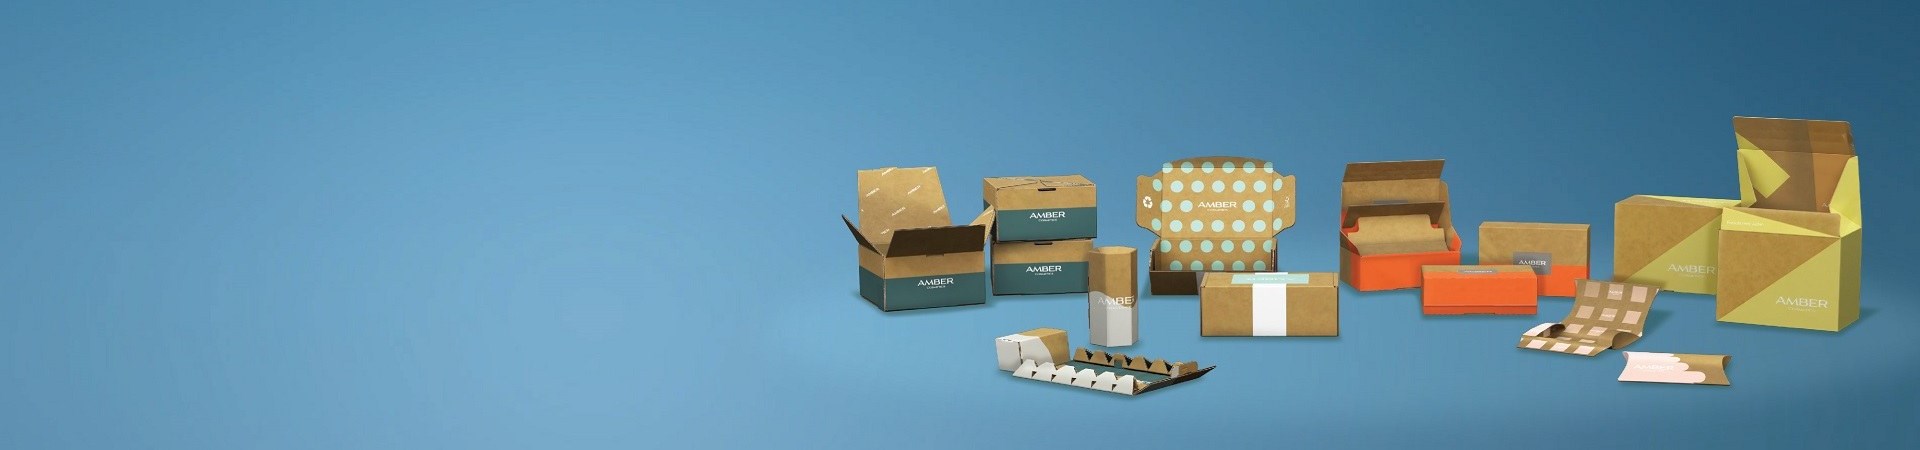 health and beauty ecommerce packaging